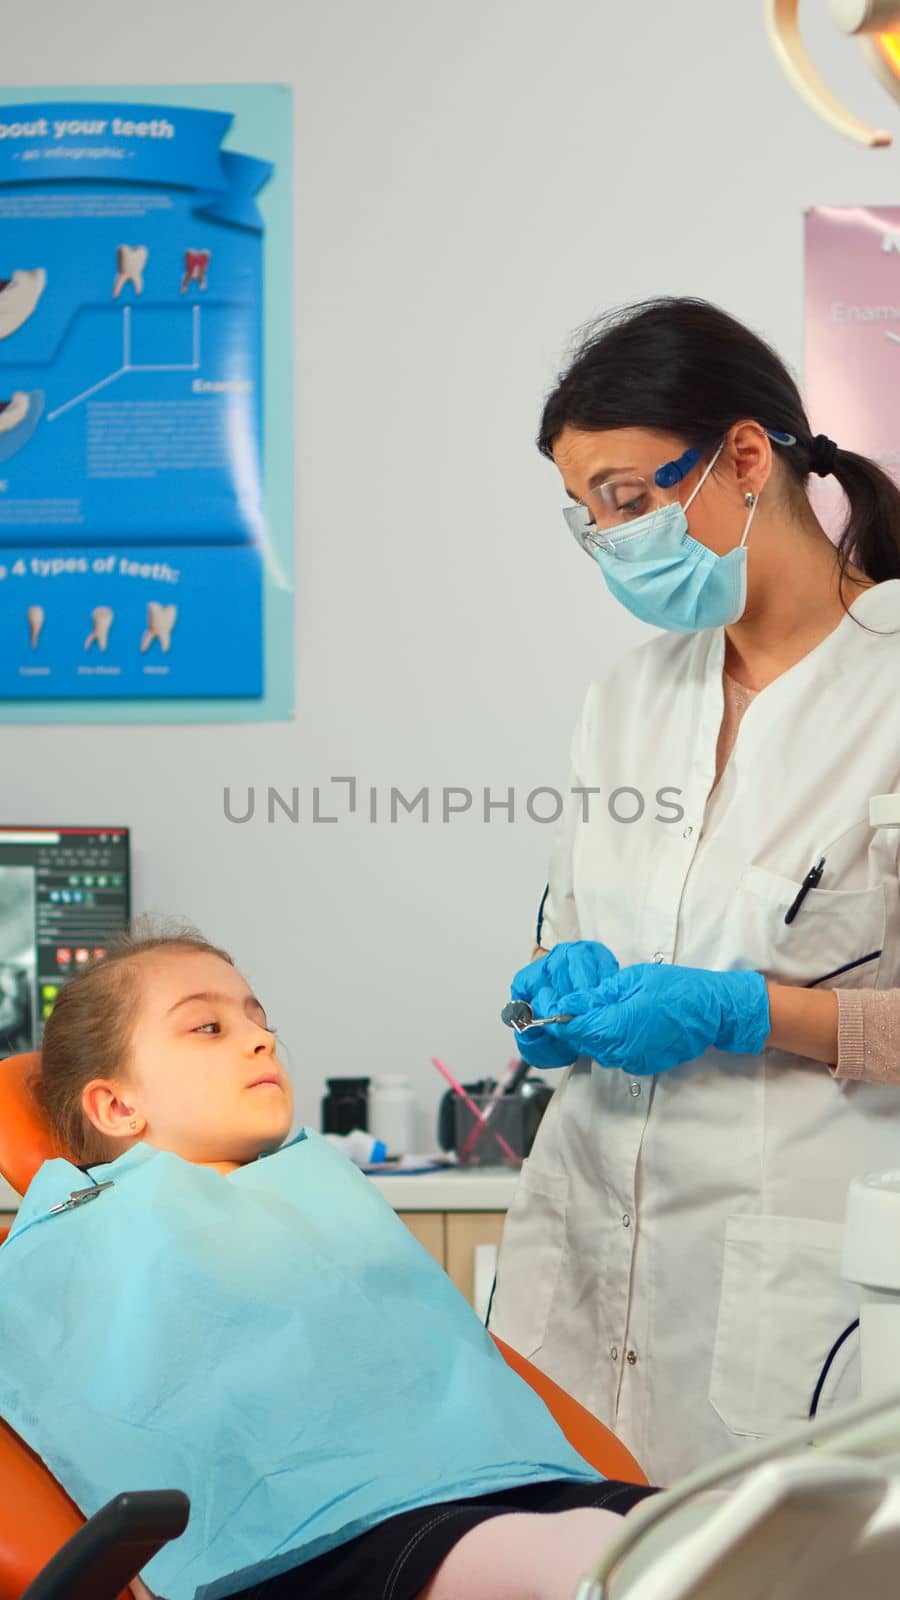 Pediatric dentist with mask checking dental health of a little girl sitting in stomatological chair, doctor using sterilized dental instruments, working with man nurse in modern stomatological unit.